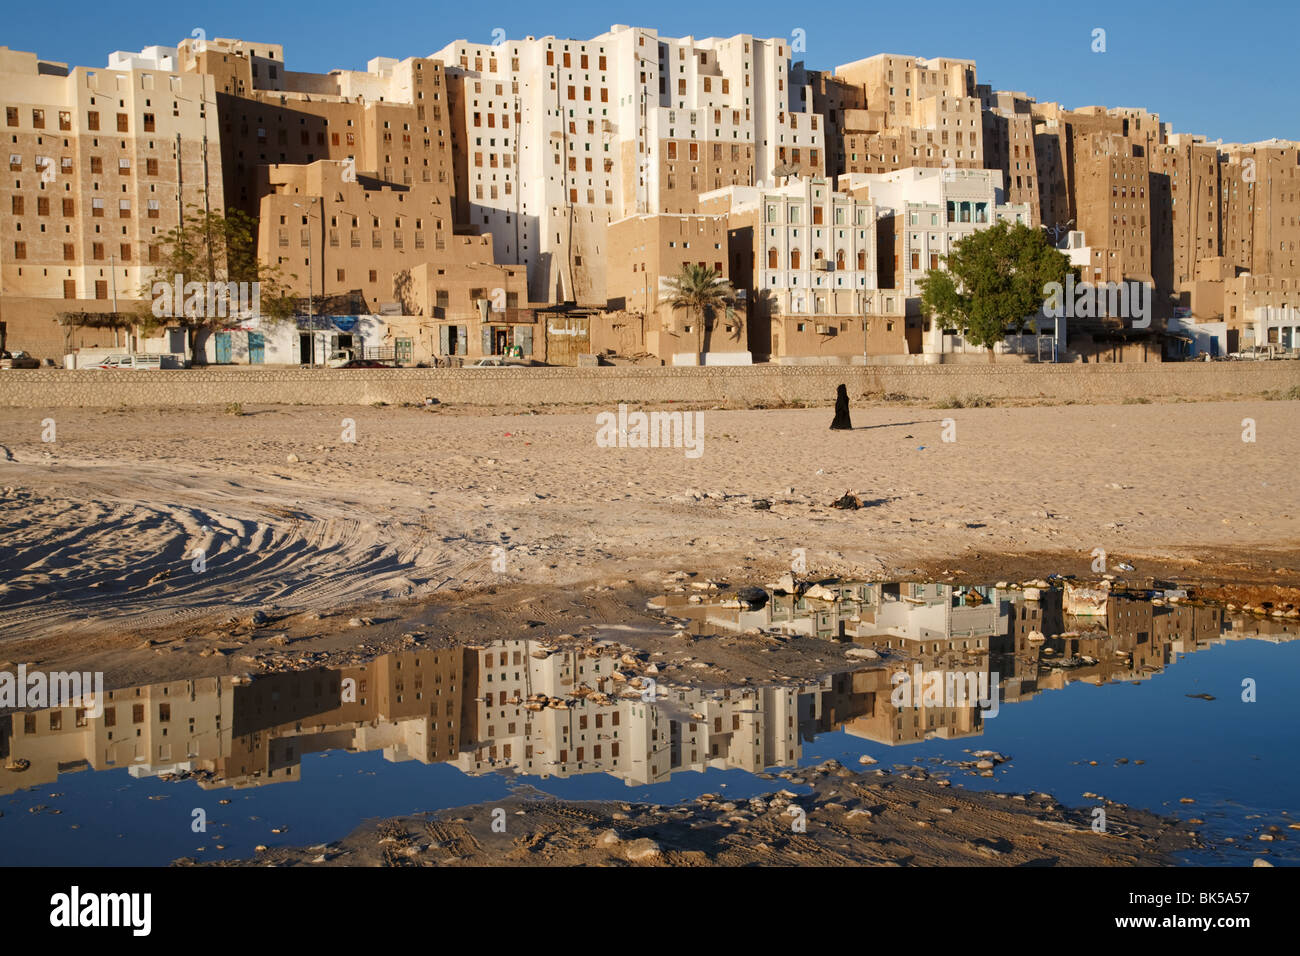 A UNESCO listed heritage town of Shibam, Yemen famous for its muddy tall buildings. Stock Photo